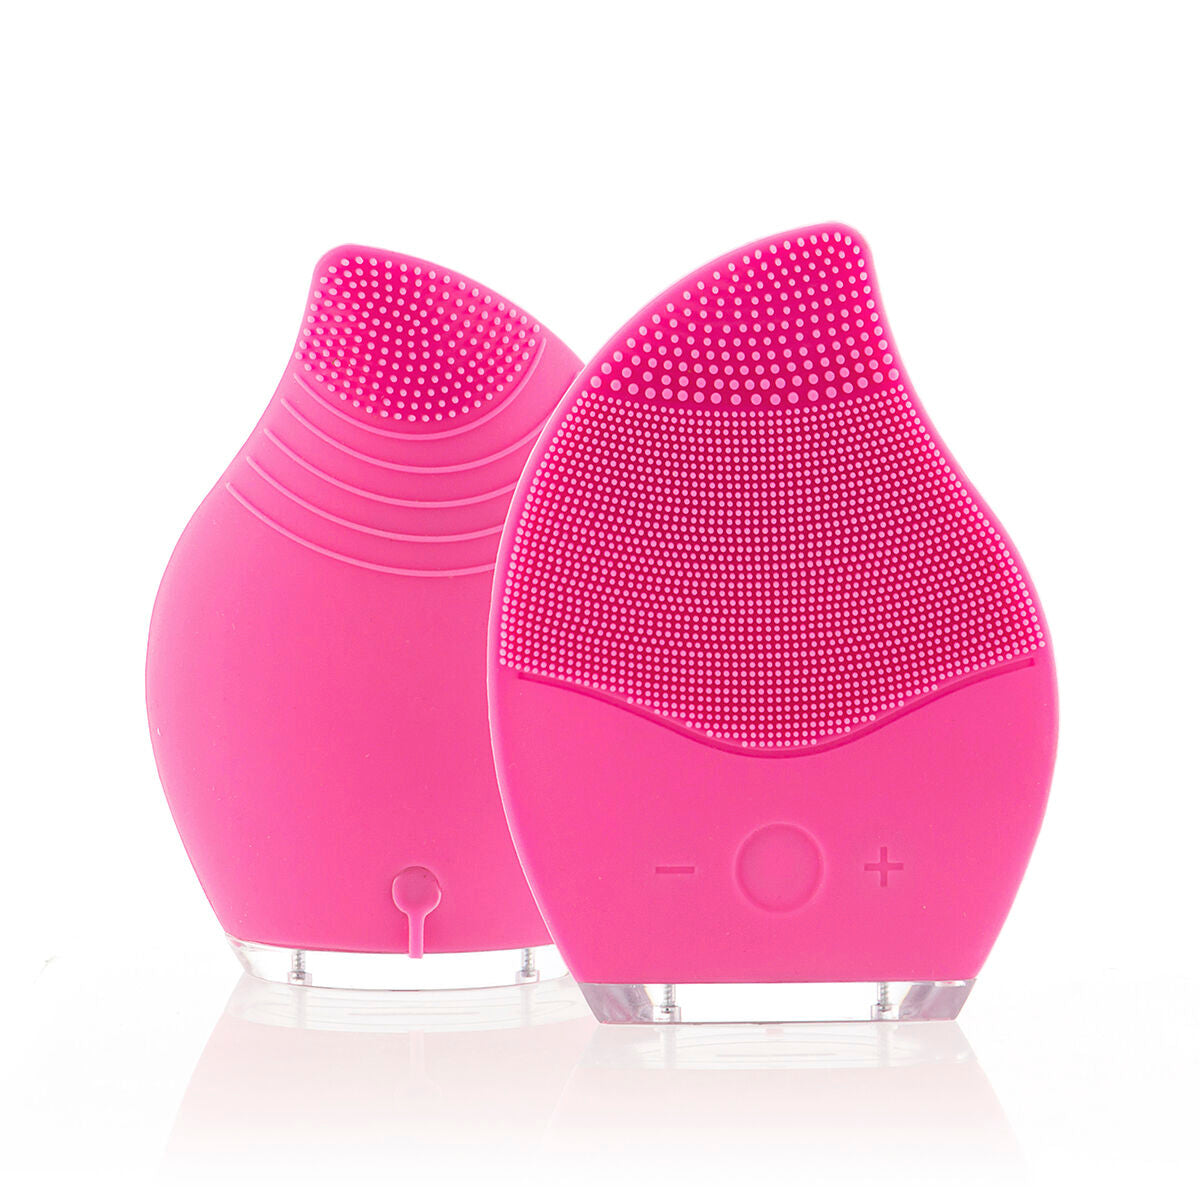 Rechargeable Facial Cleaner-Massager InnovaGoods